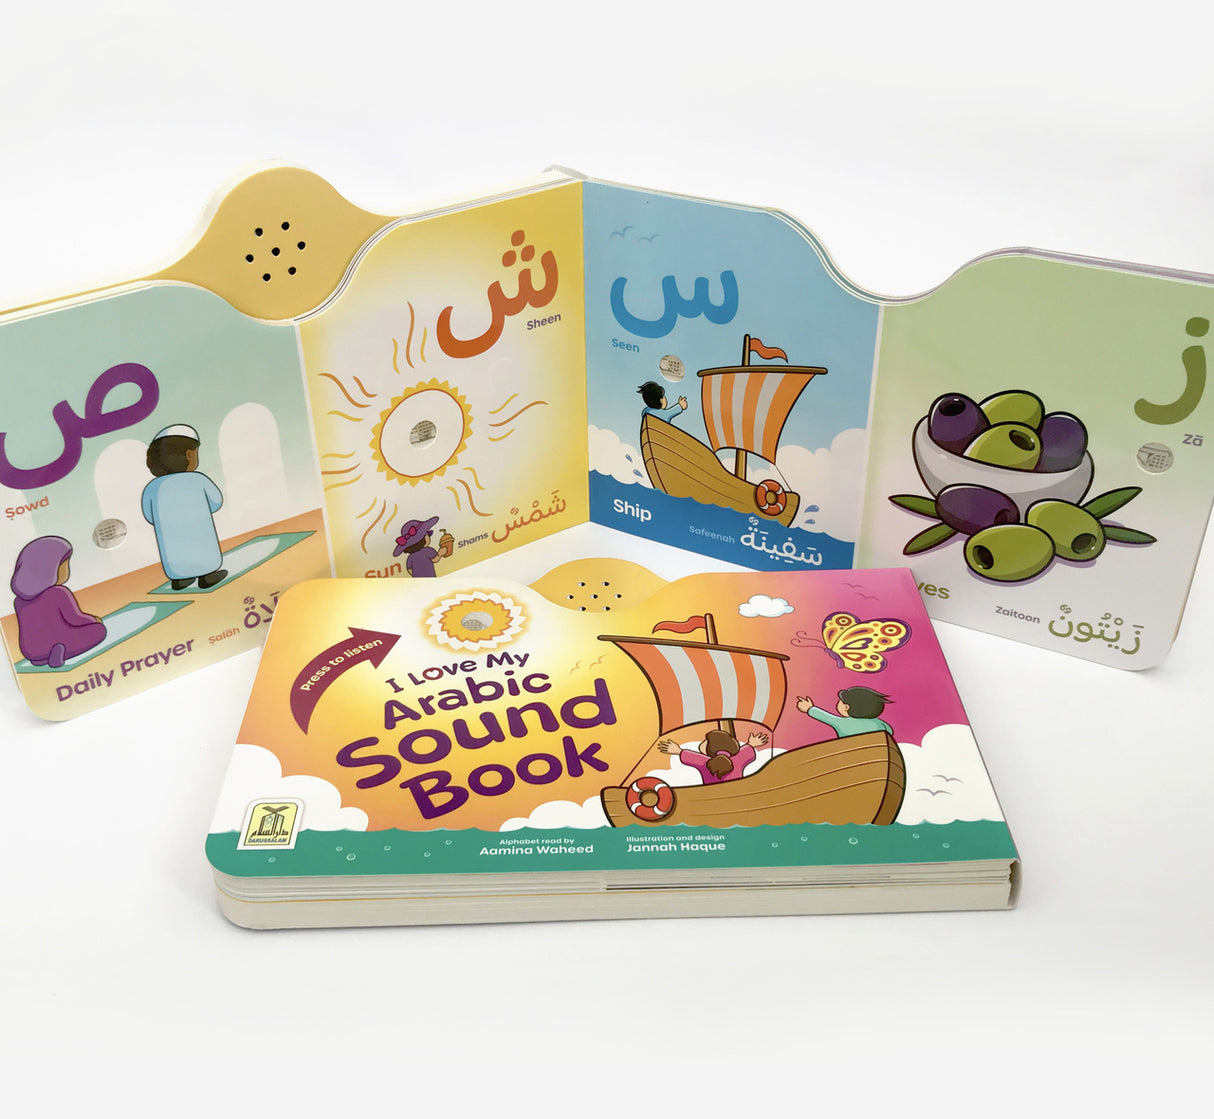 I Love My Arabic Sound Book Pictures